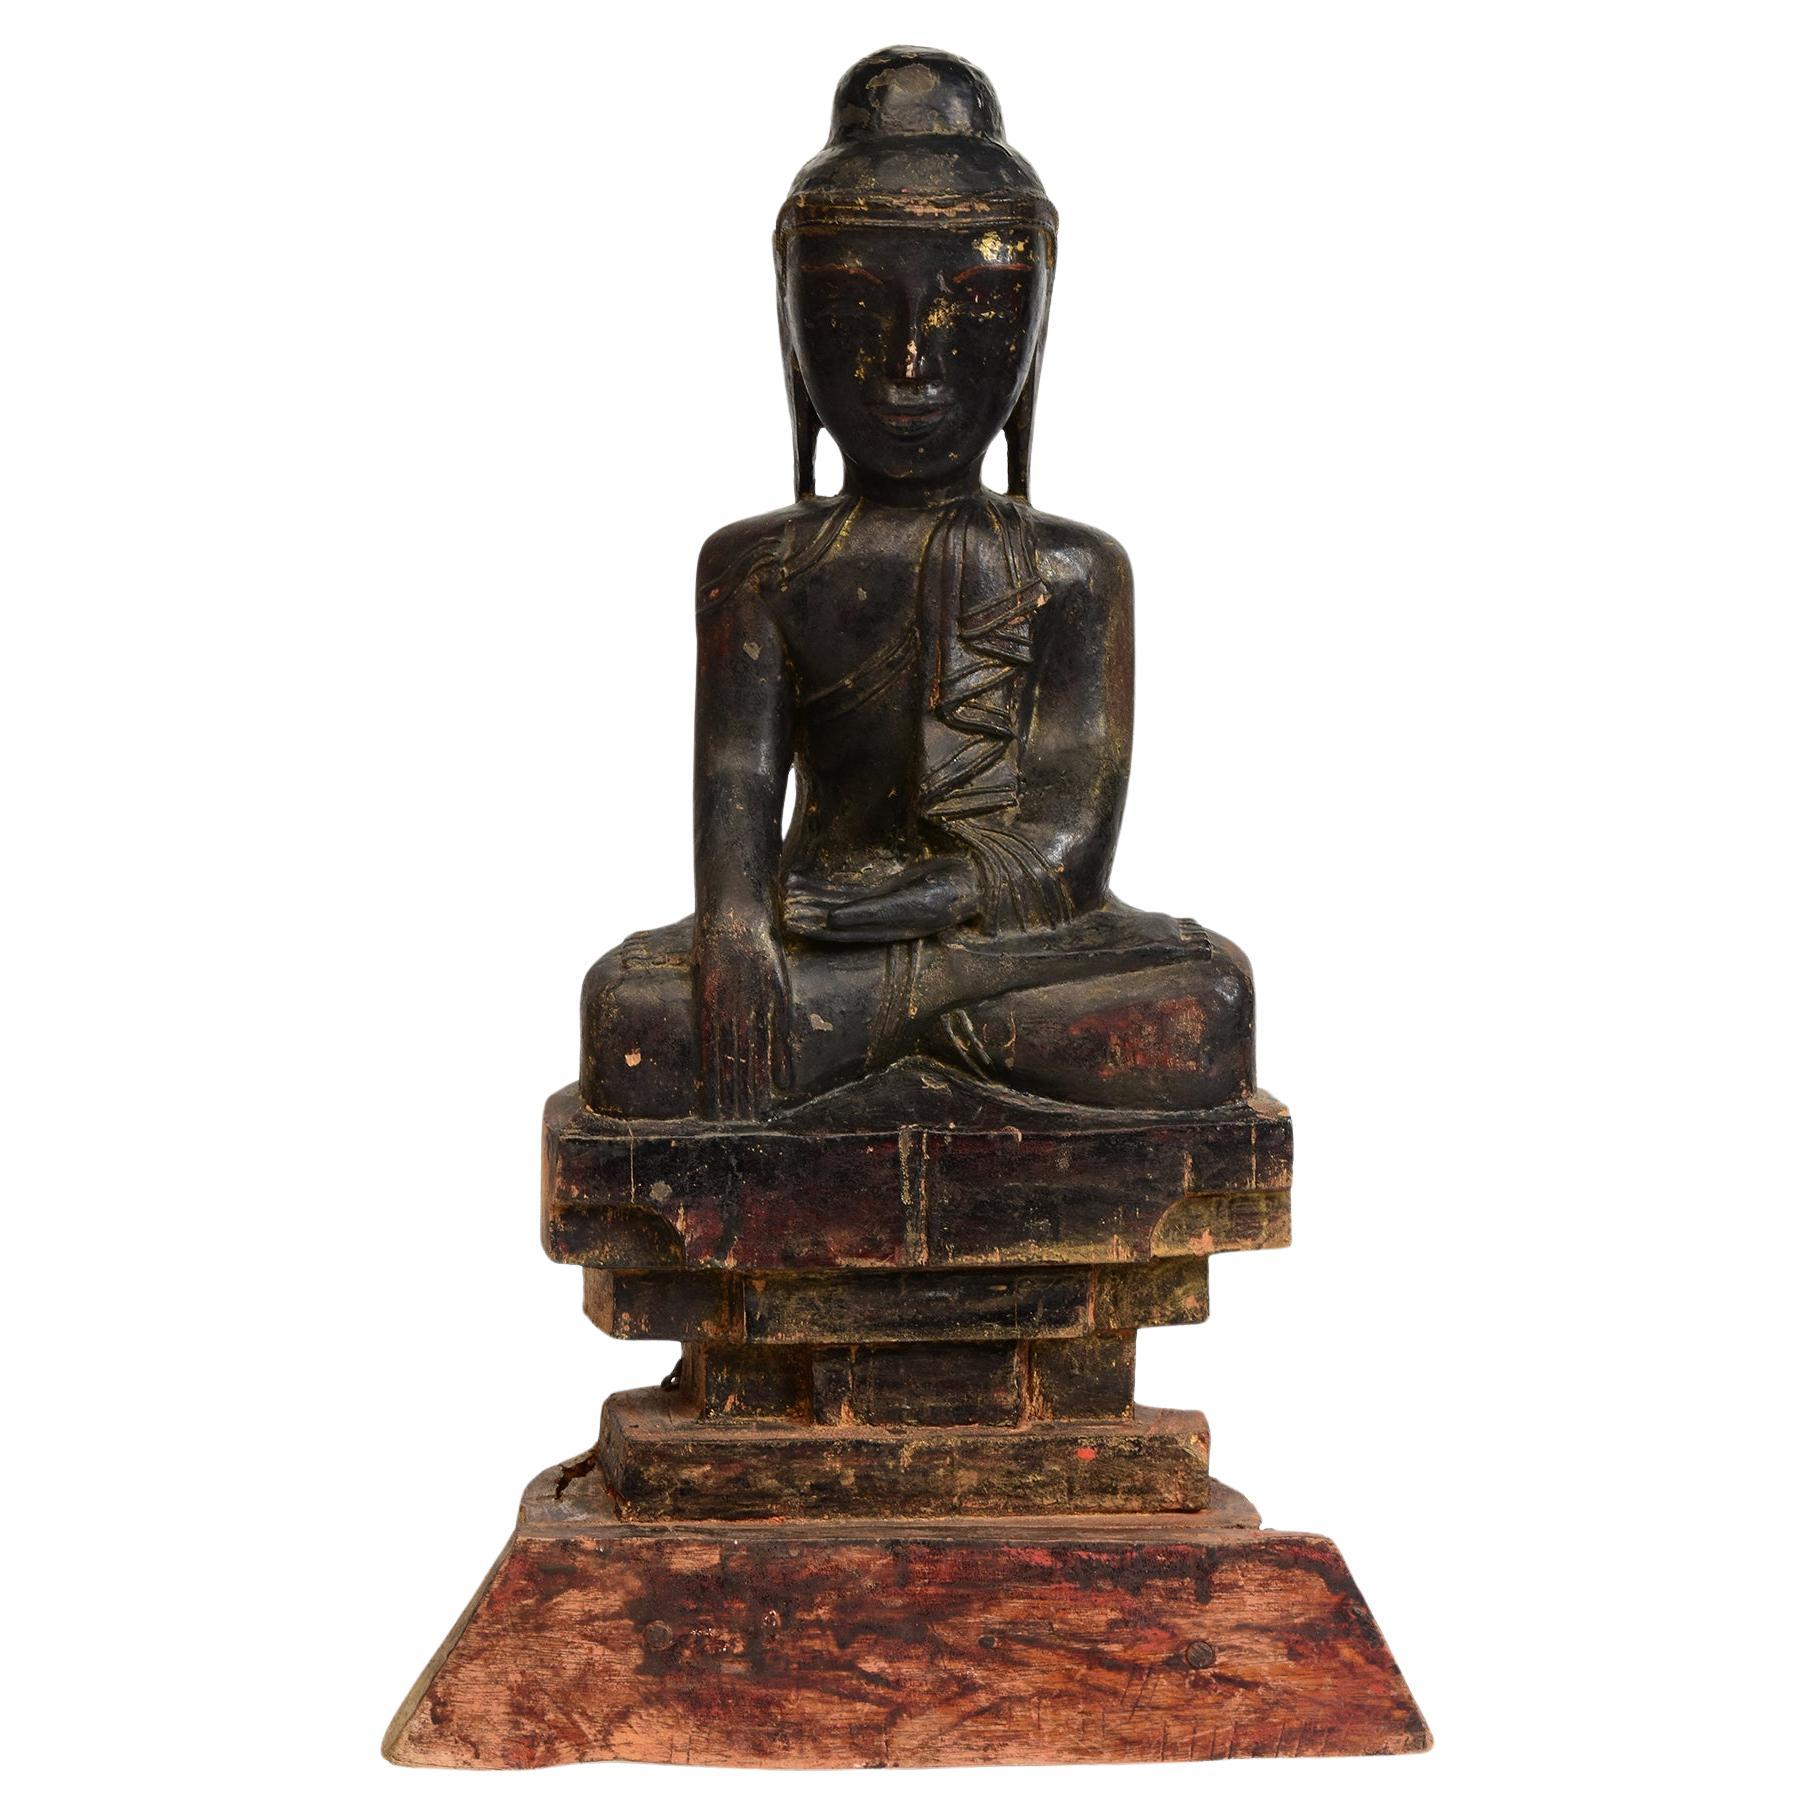 18th Century, Shan, Antique Burmese Wooden Seated Buddha For Sale